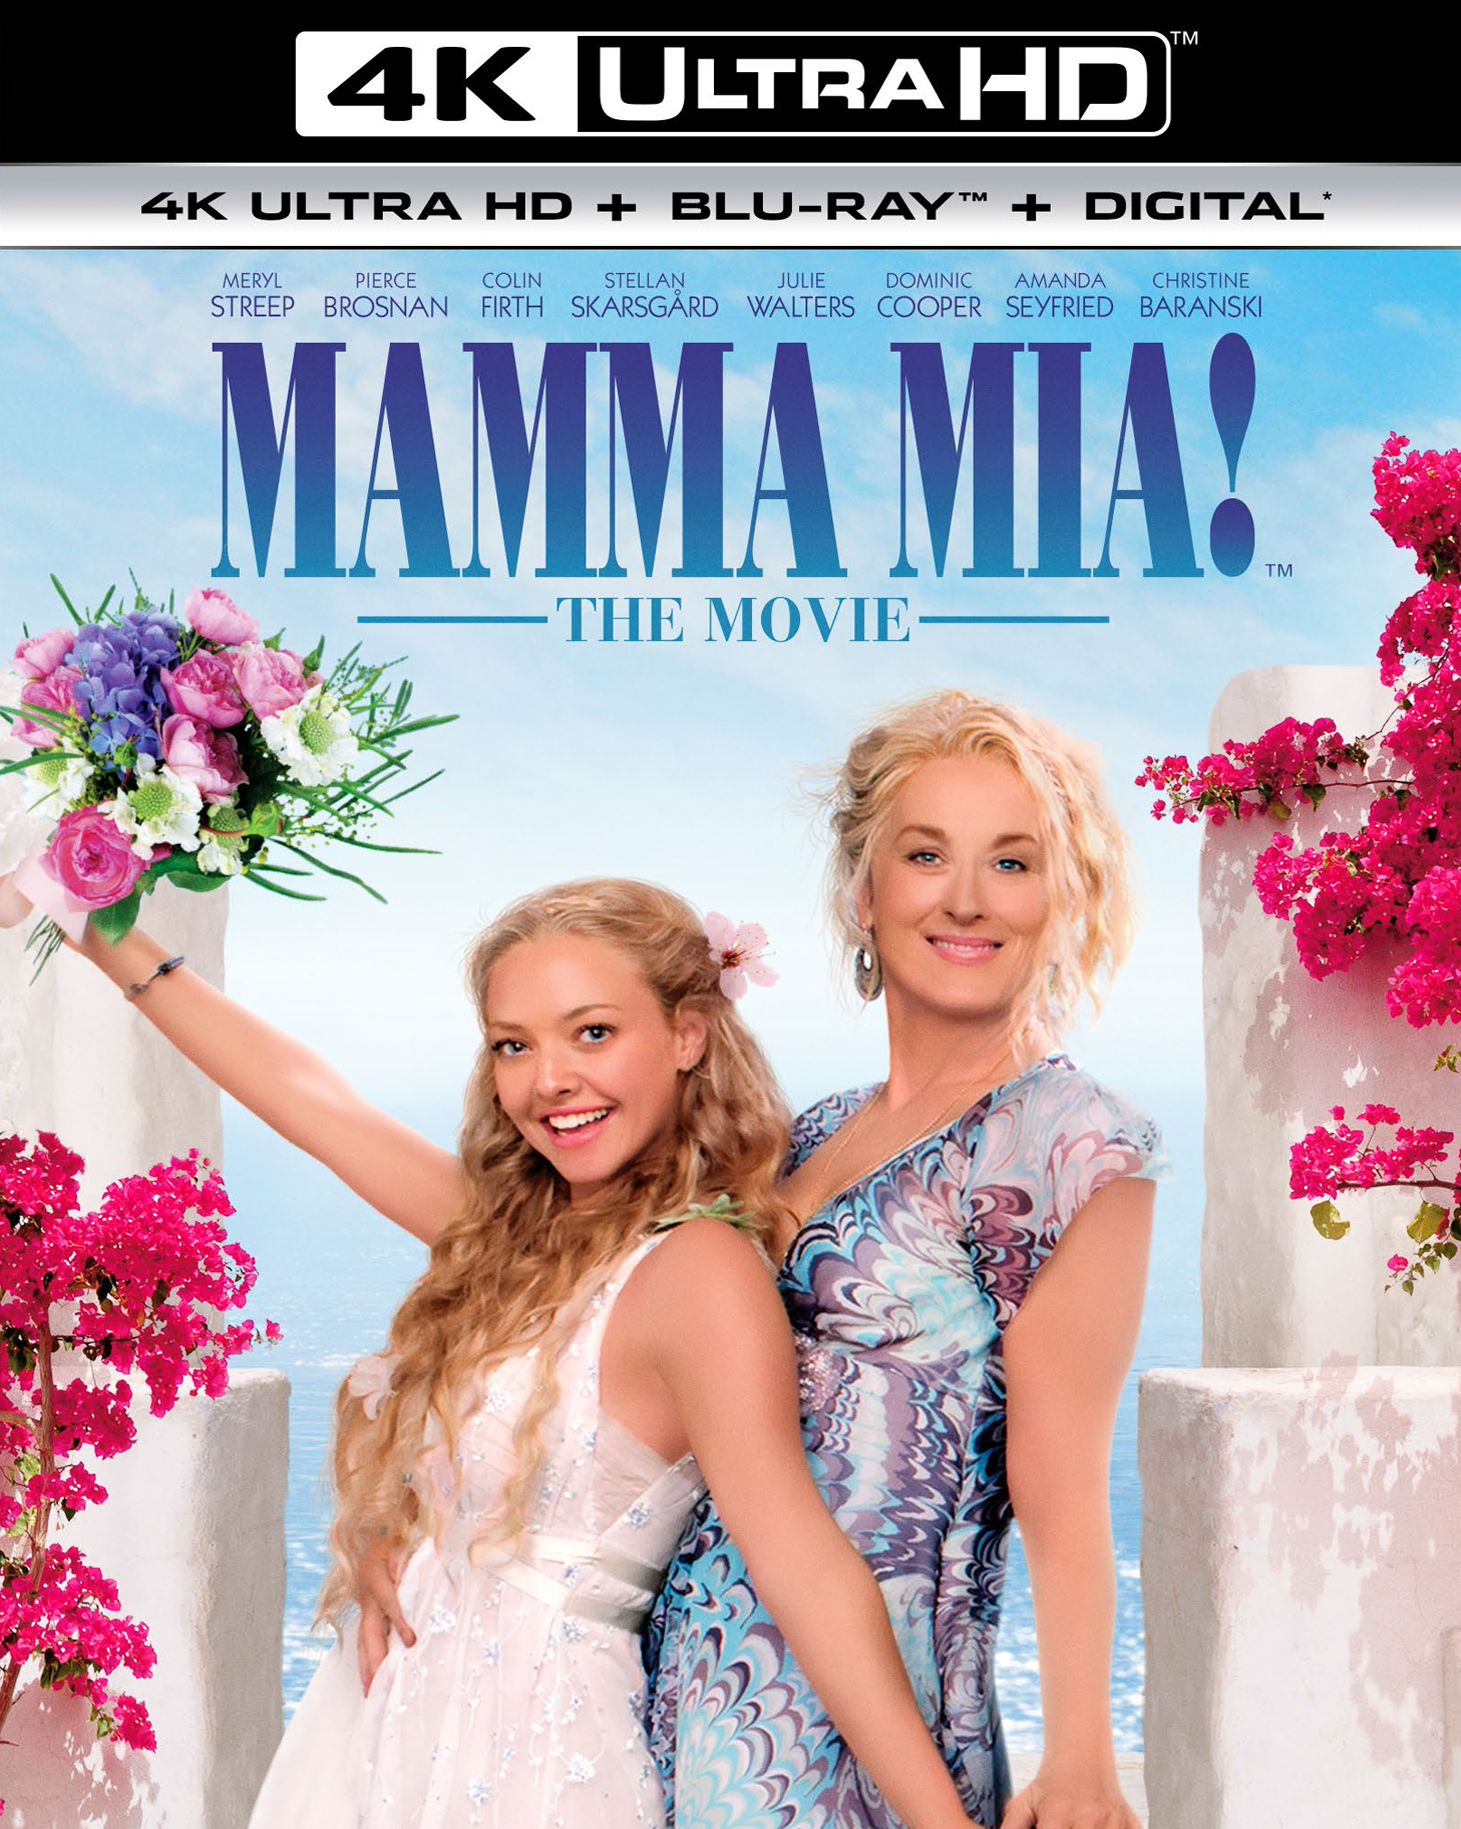 In 'Mamma Mia!: Here We Go Again' Trailer, Abba Is the Star - The New York  Times